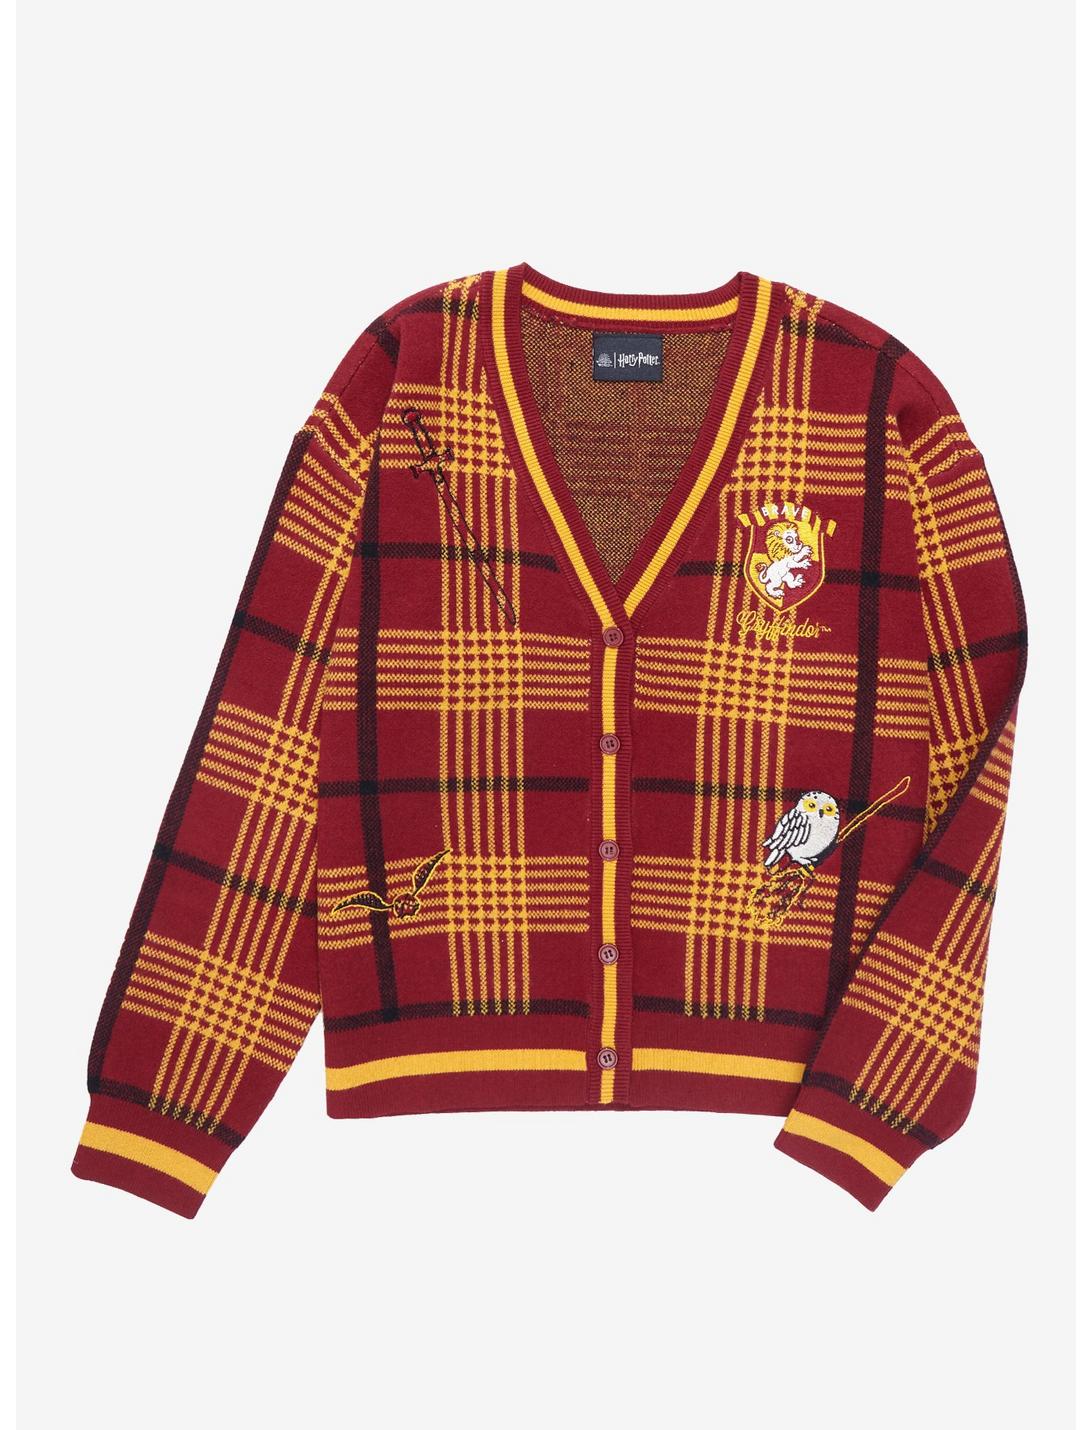 Harry Potter Gryffindor Plaid Women's Cardigan - BoxLunch Exclusive, RED, hi-res